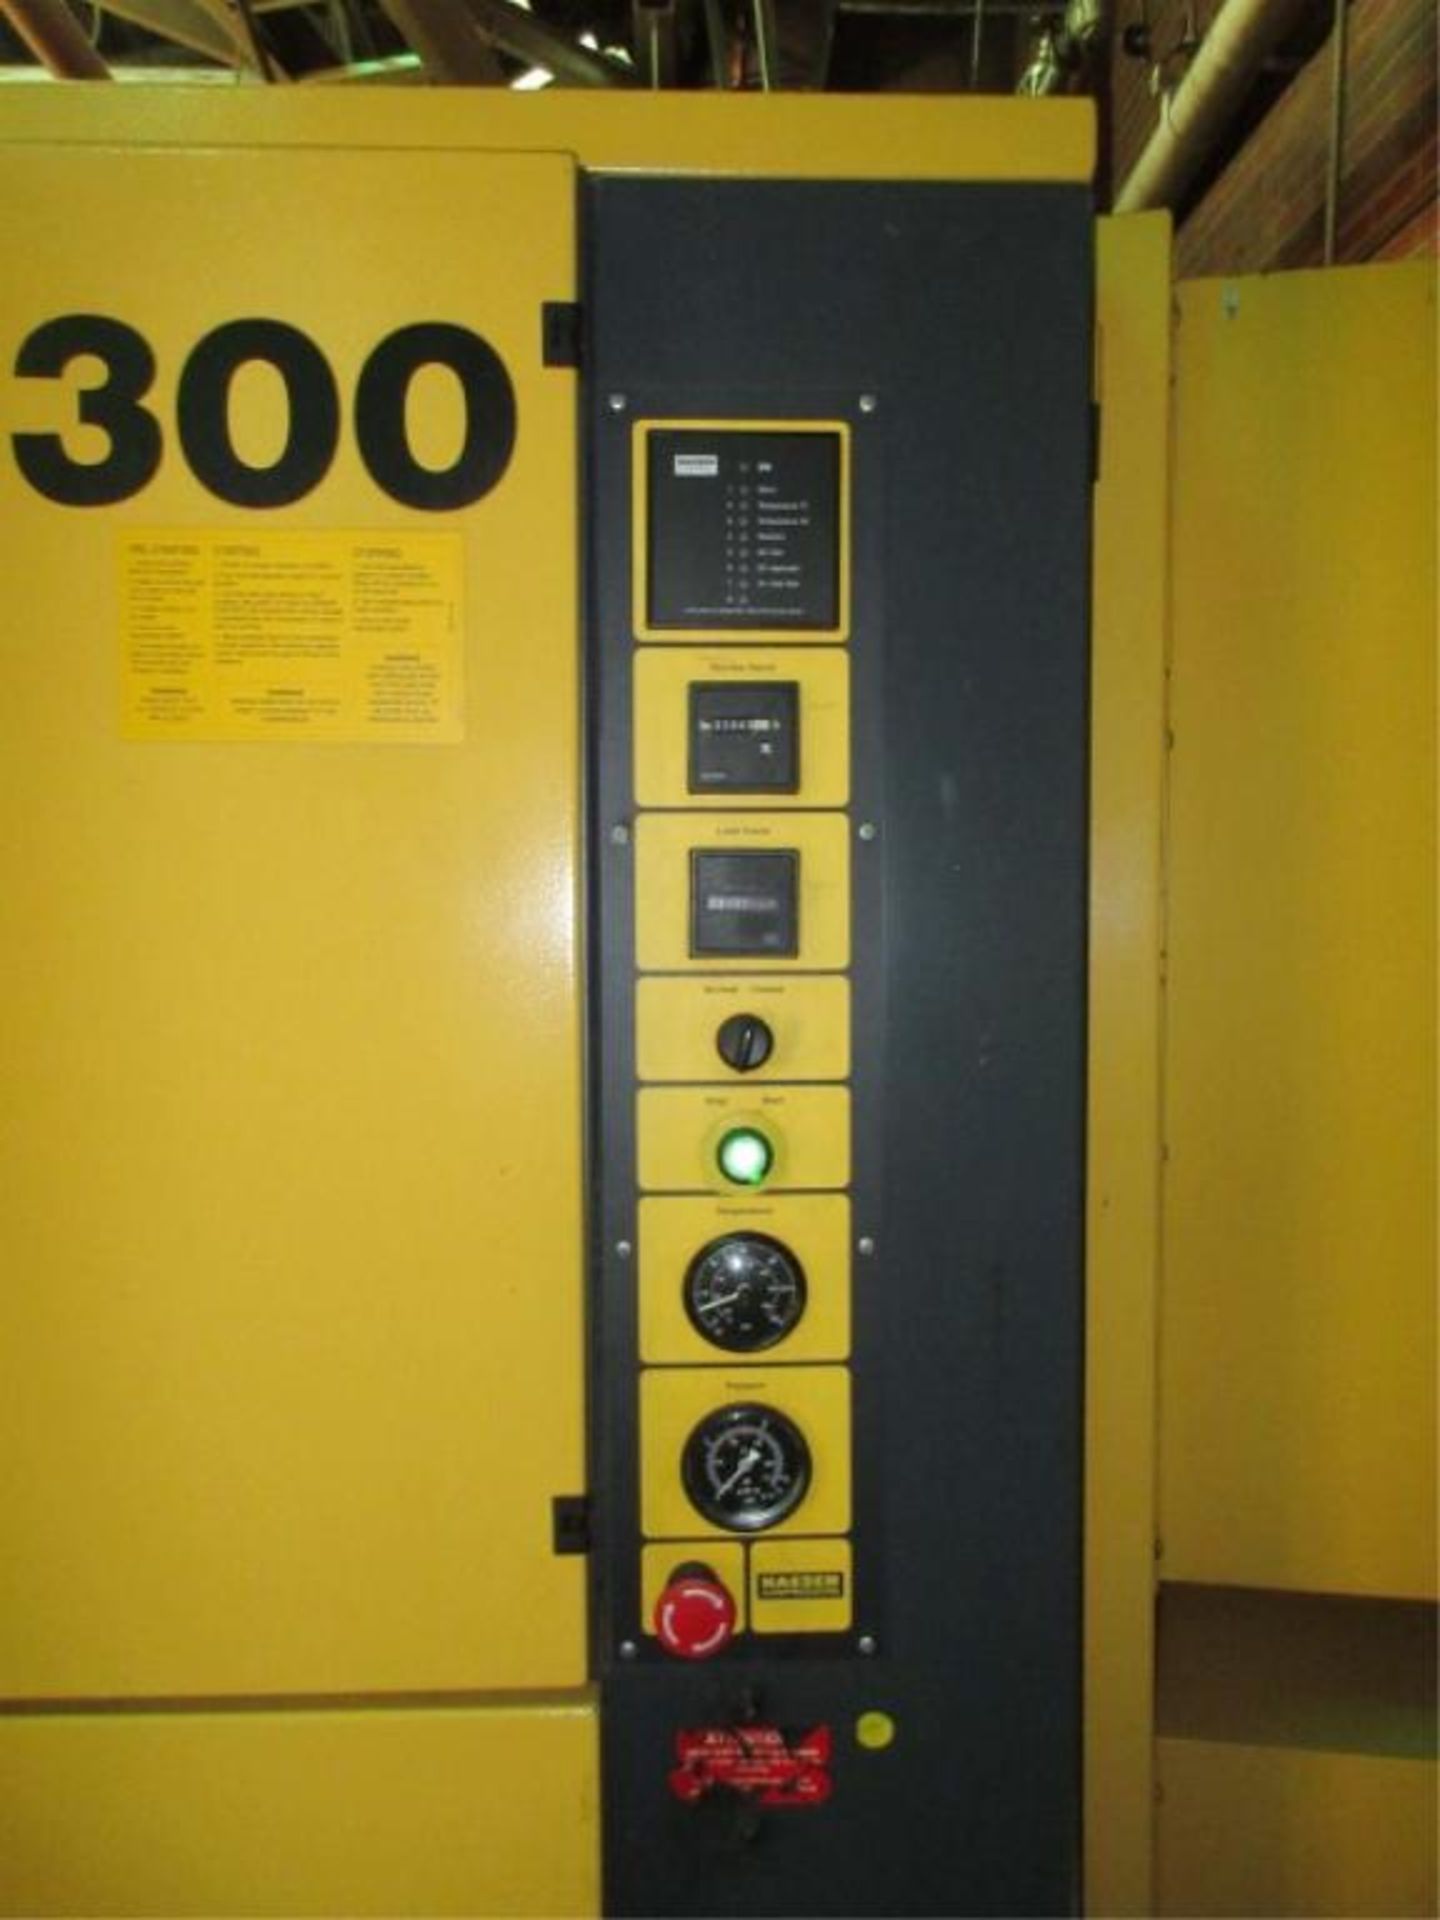 Kaeser ES 300 Sigma Profile Rotary Screw Air Compressor, (1995), service/load hrs. showing 1883/ - Image 2 of 9